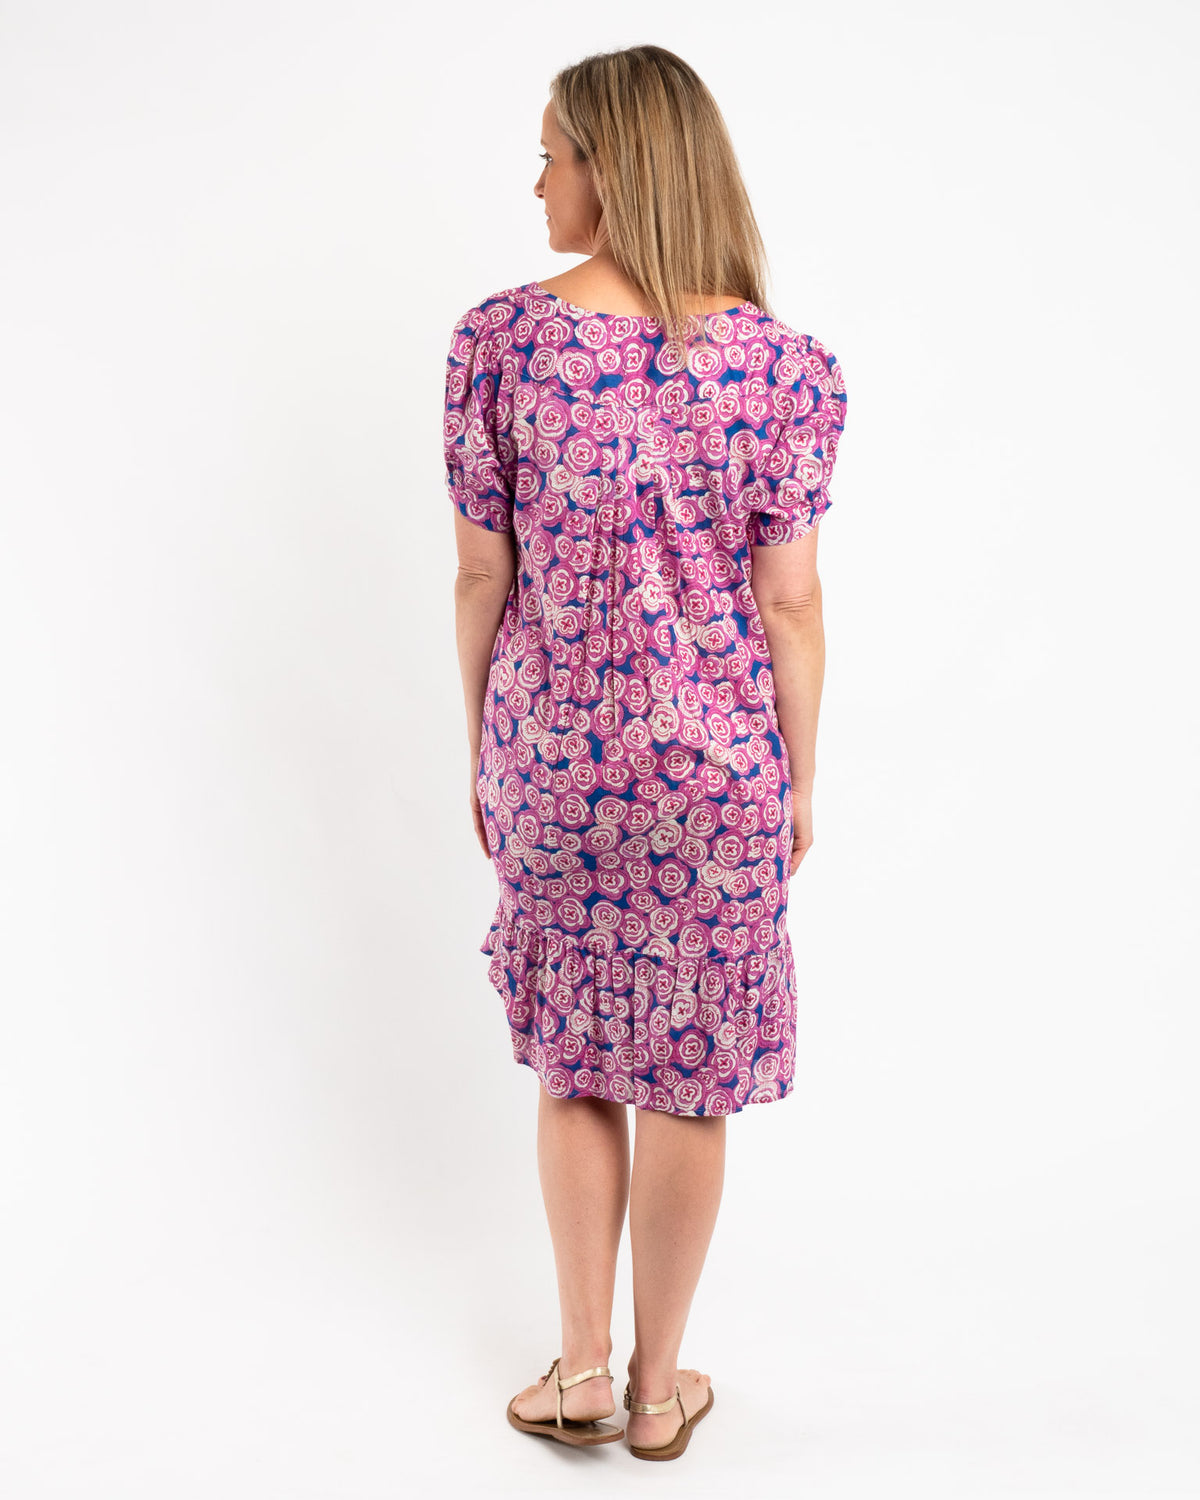 Cap Sleeve Summer Dress in Pink and Royal Blue